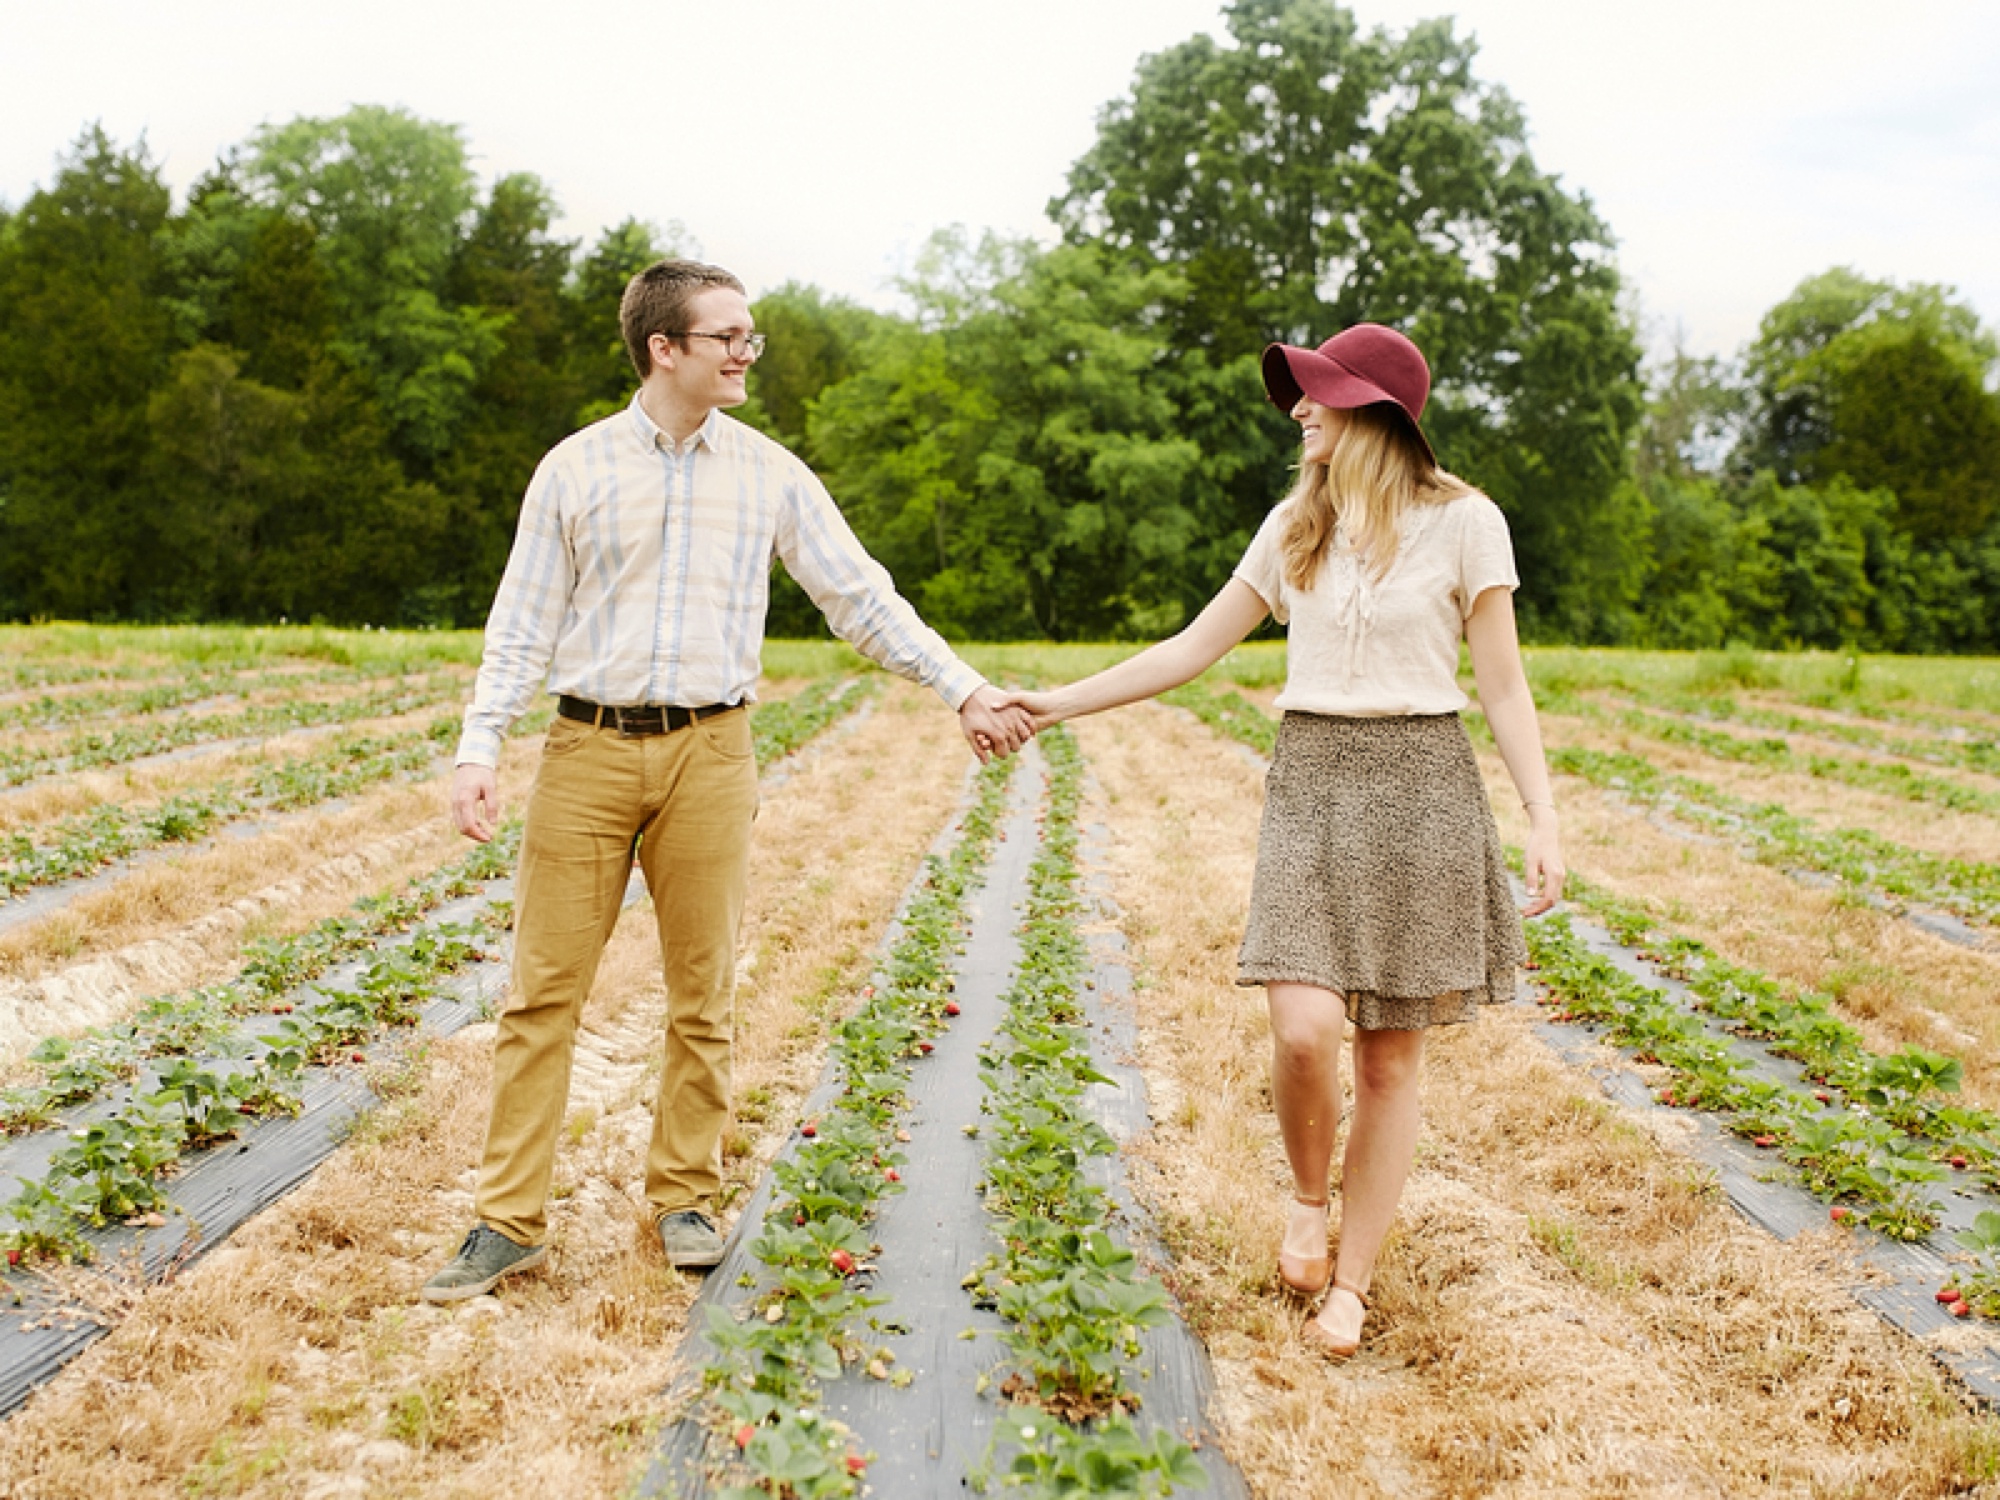 Tennessee Strawberry Field Anniversary Session, engagement session ideas, styled shoots